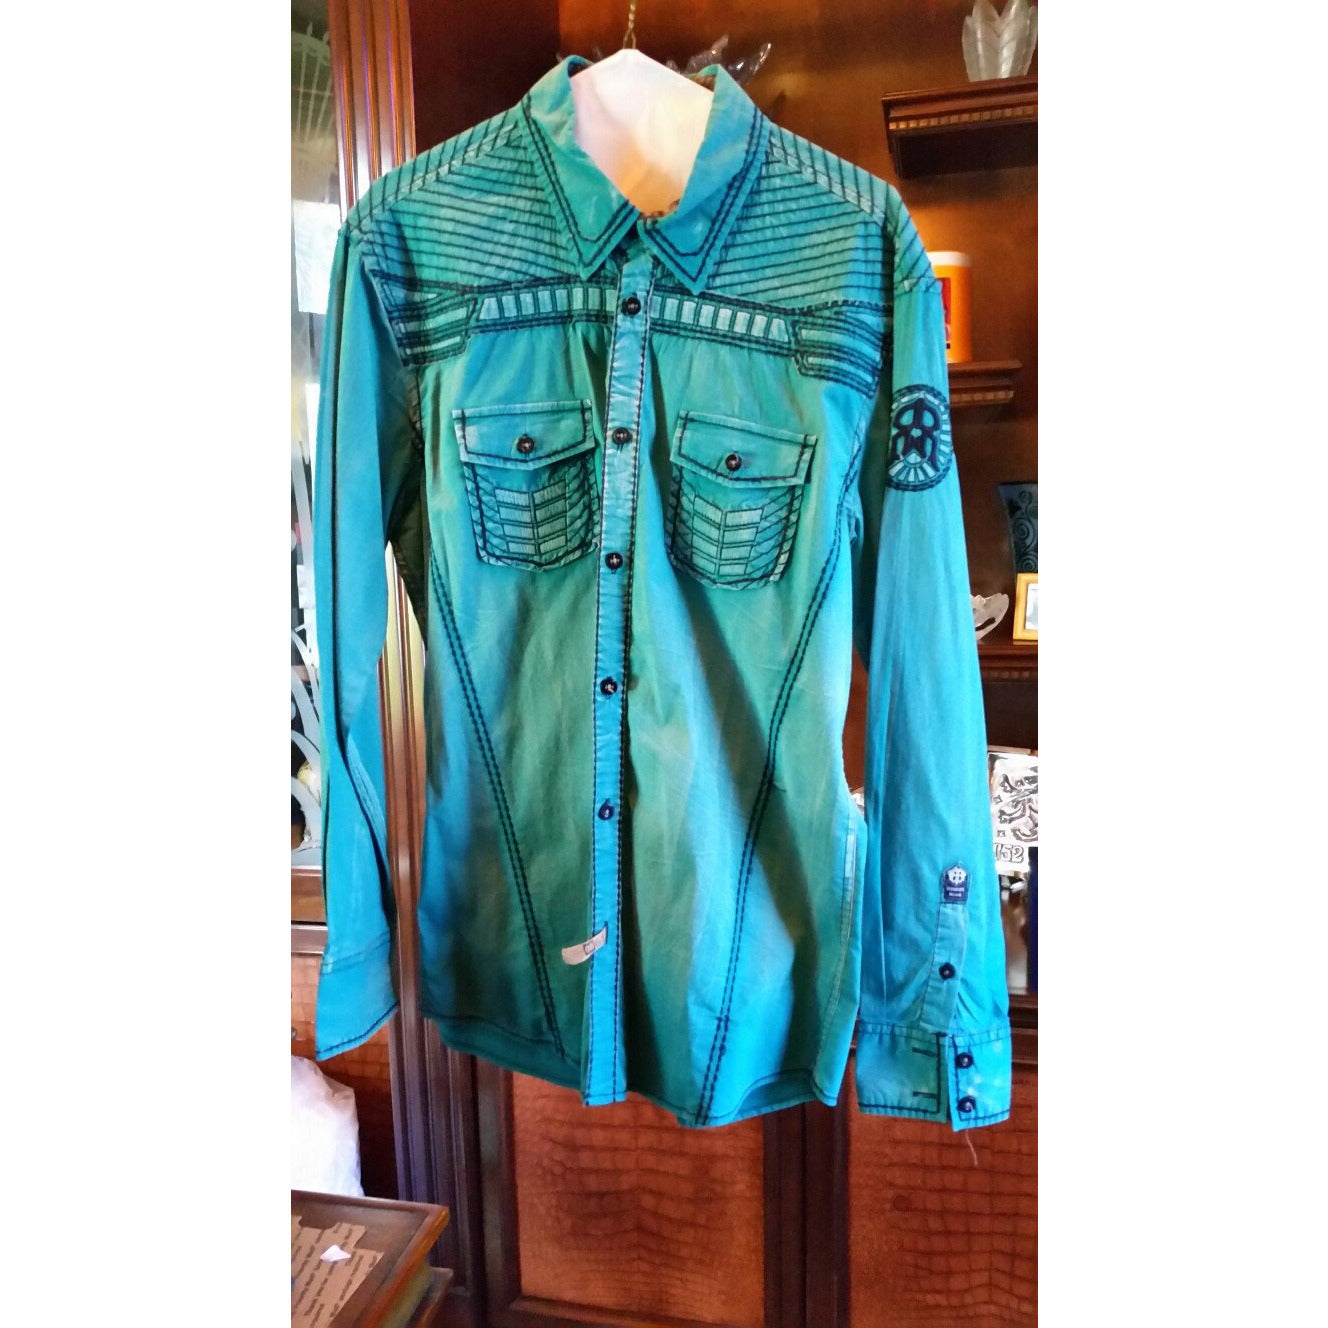 Roar Teal Long Sleeve Preowned Good Condition Shirt